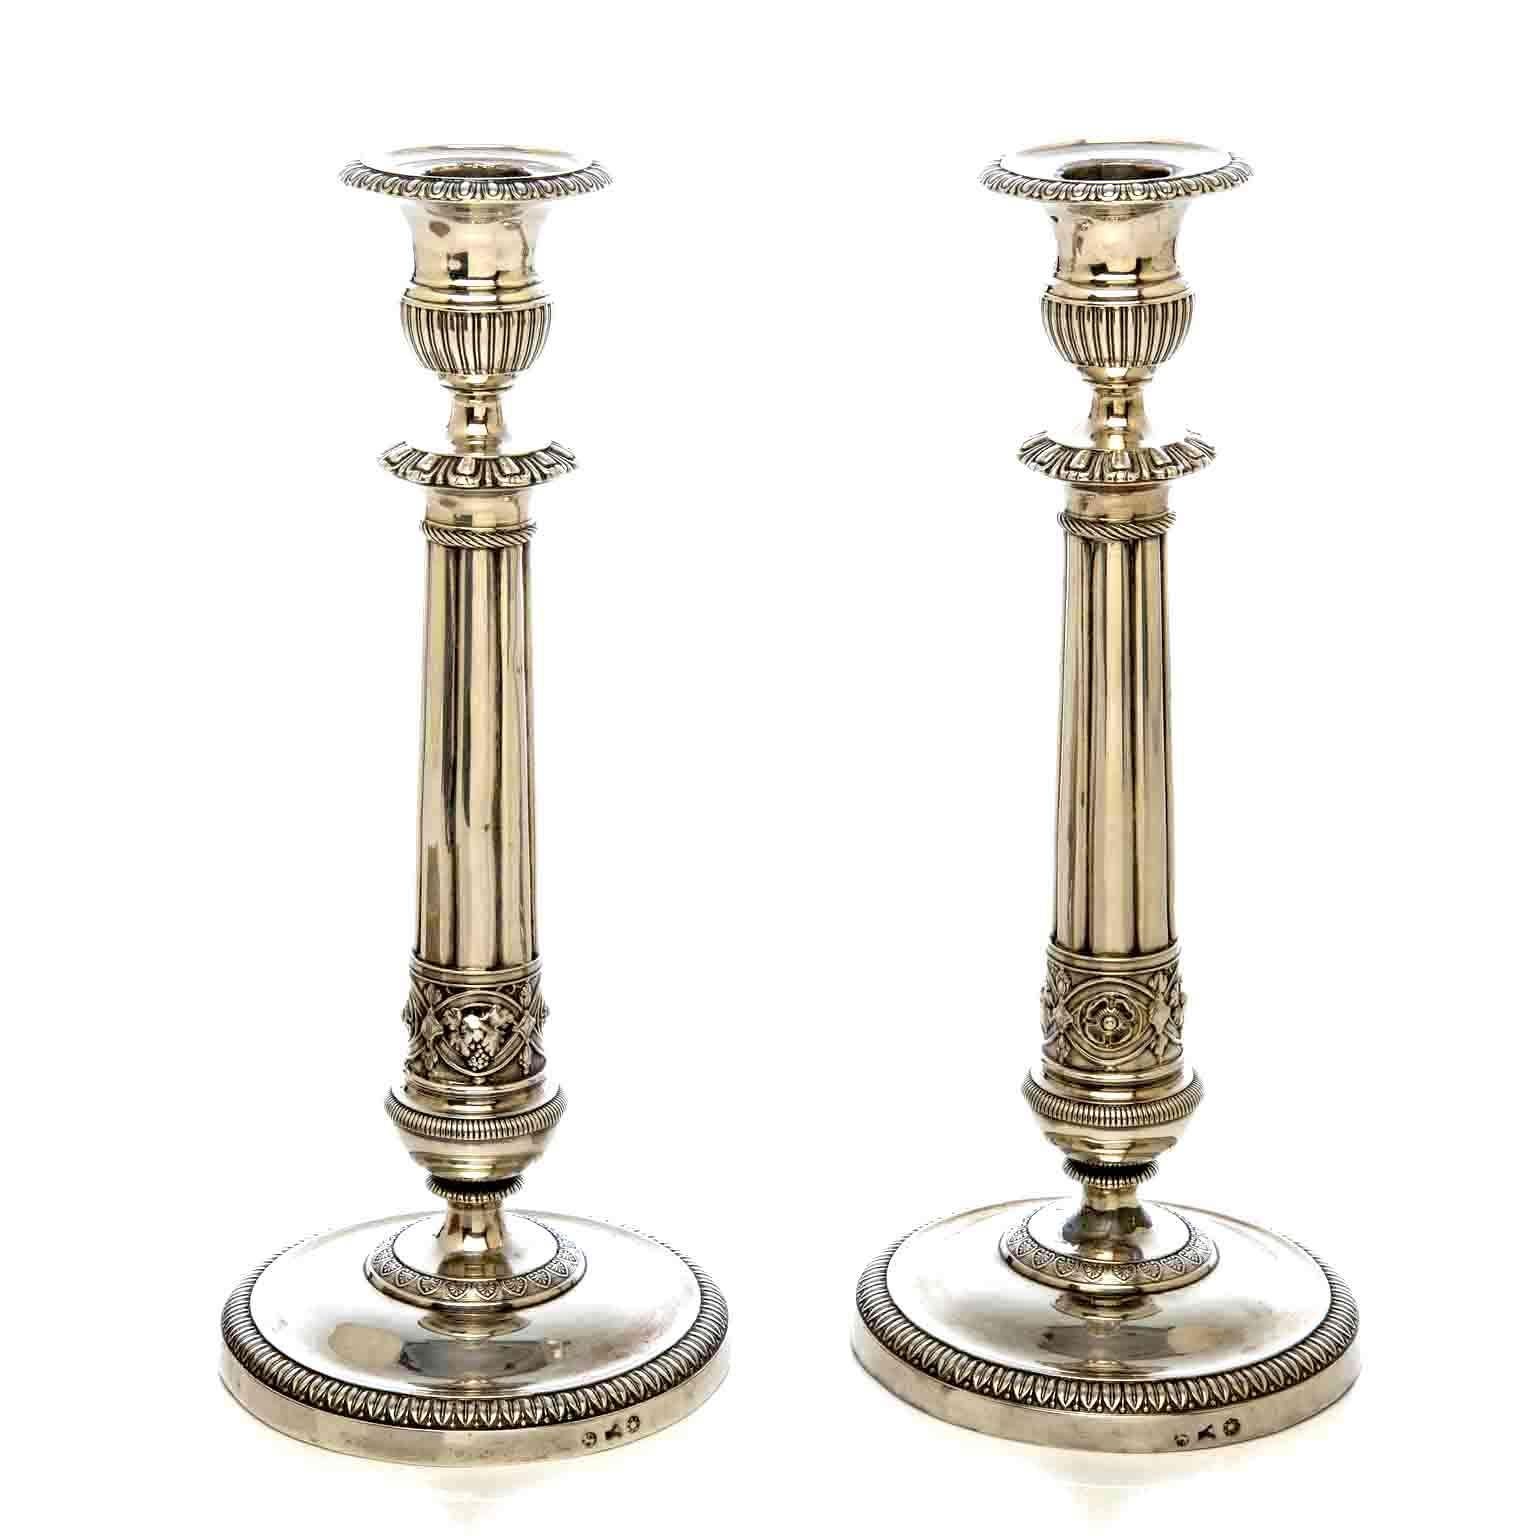 Pair of 19th century Italian Neoclassic silver candlesticks, chiseled with geometrical motifs and acanthus leaves patterns. Hallmarked Milan, 1820 by Liverti Francesco silver maker, a circular foot engraved with leafy and geometric edges.

The two